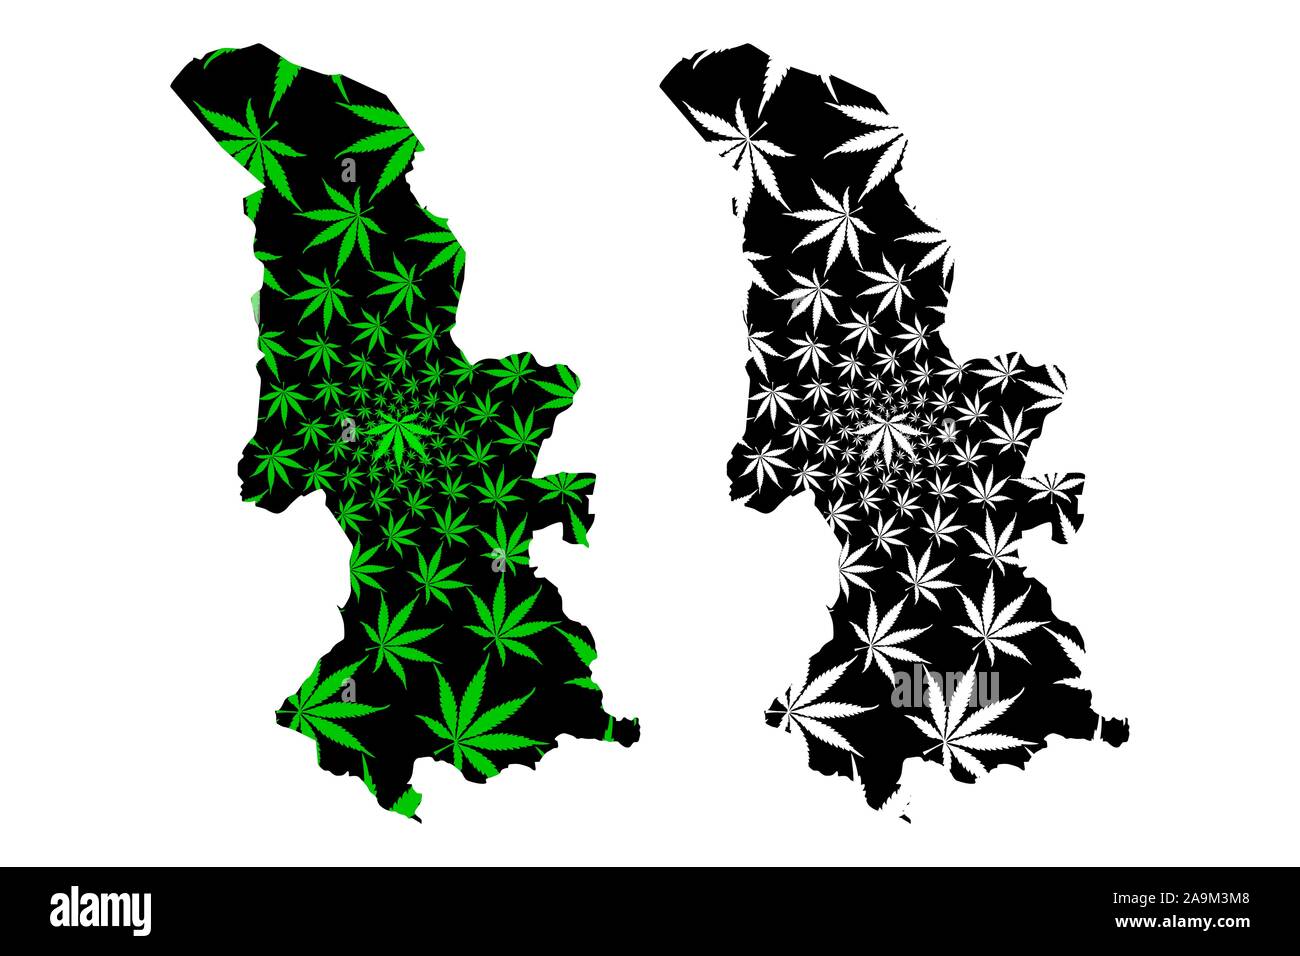 Torfaen (United Kingdom, Wales, Cymru, Principal areas of Wales) map is designed cannabis leaf green and black, Torfaen County Borough  map made of ma Stock Vector